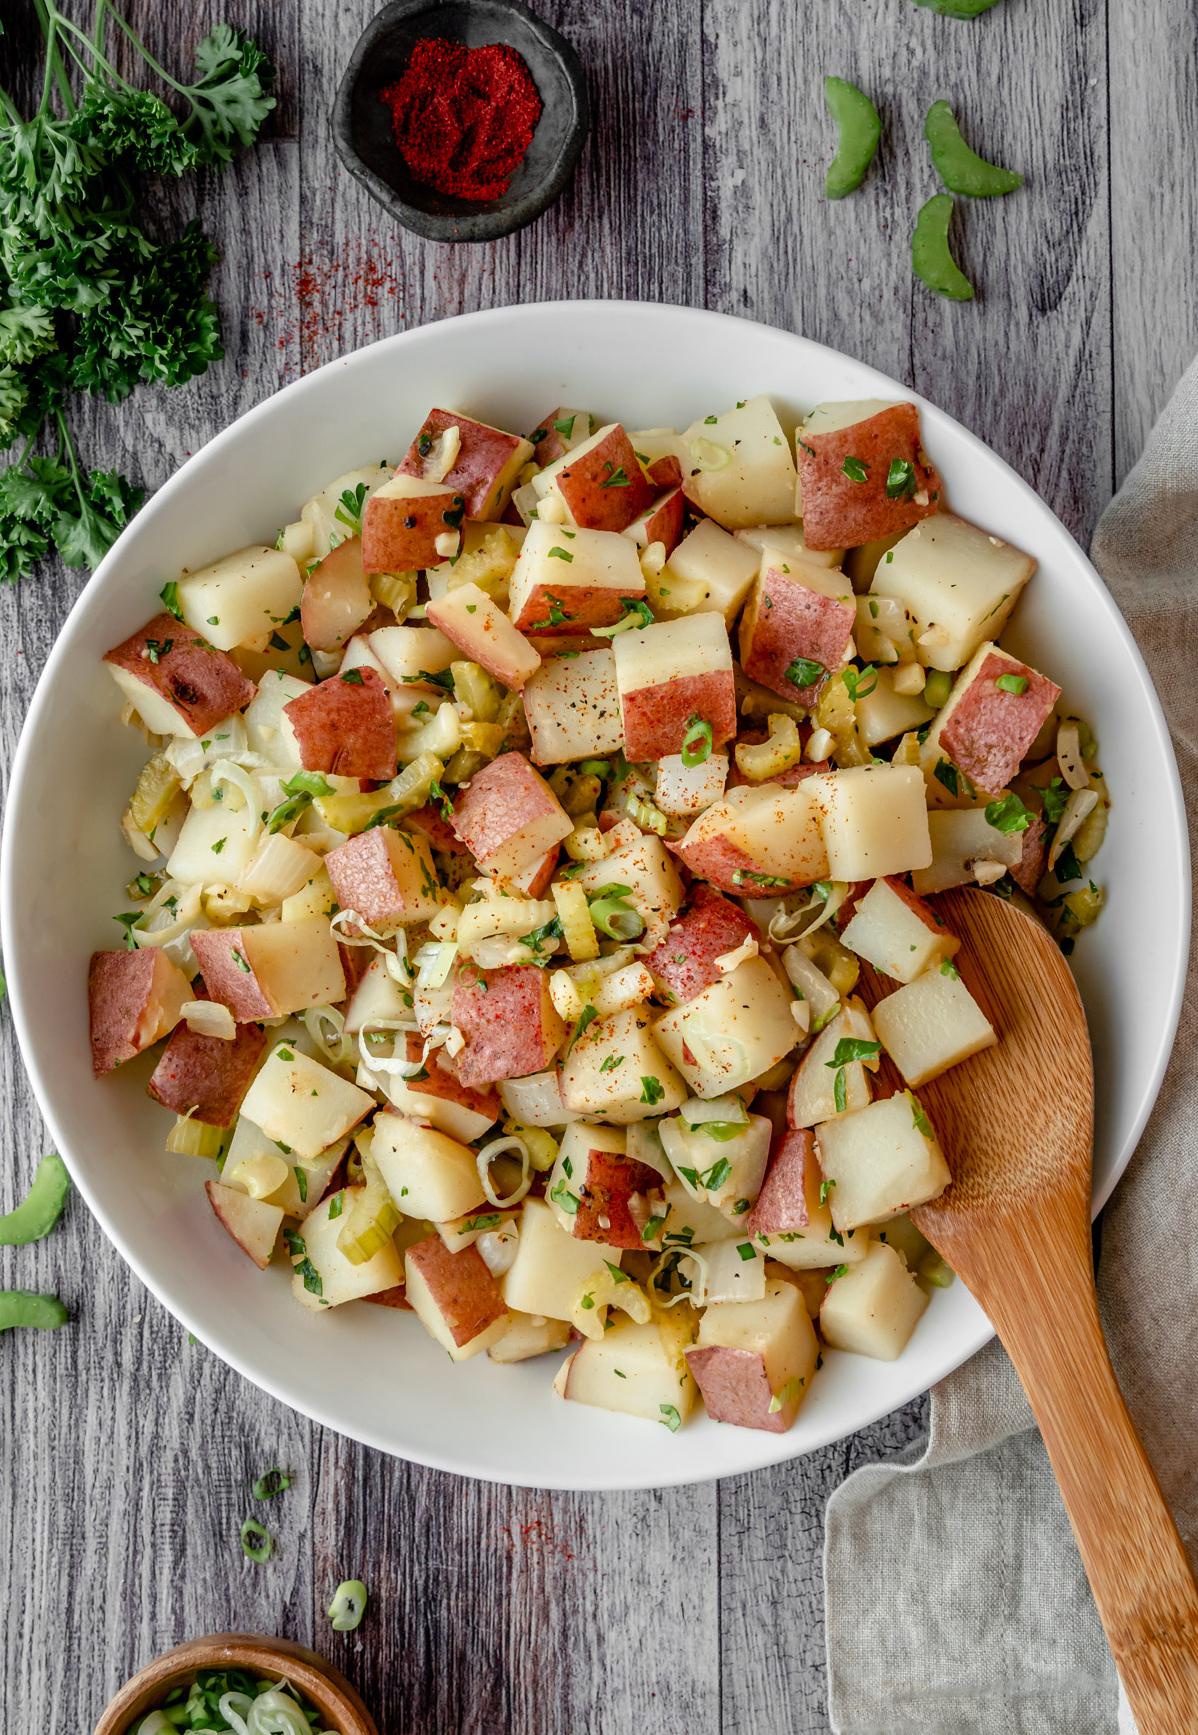  Thumbs up for this flavorsome and hearty German potato salad!